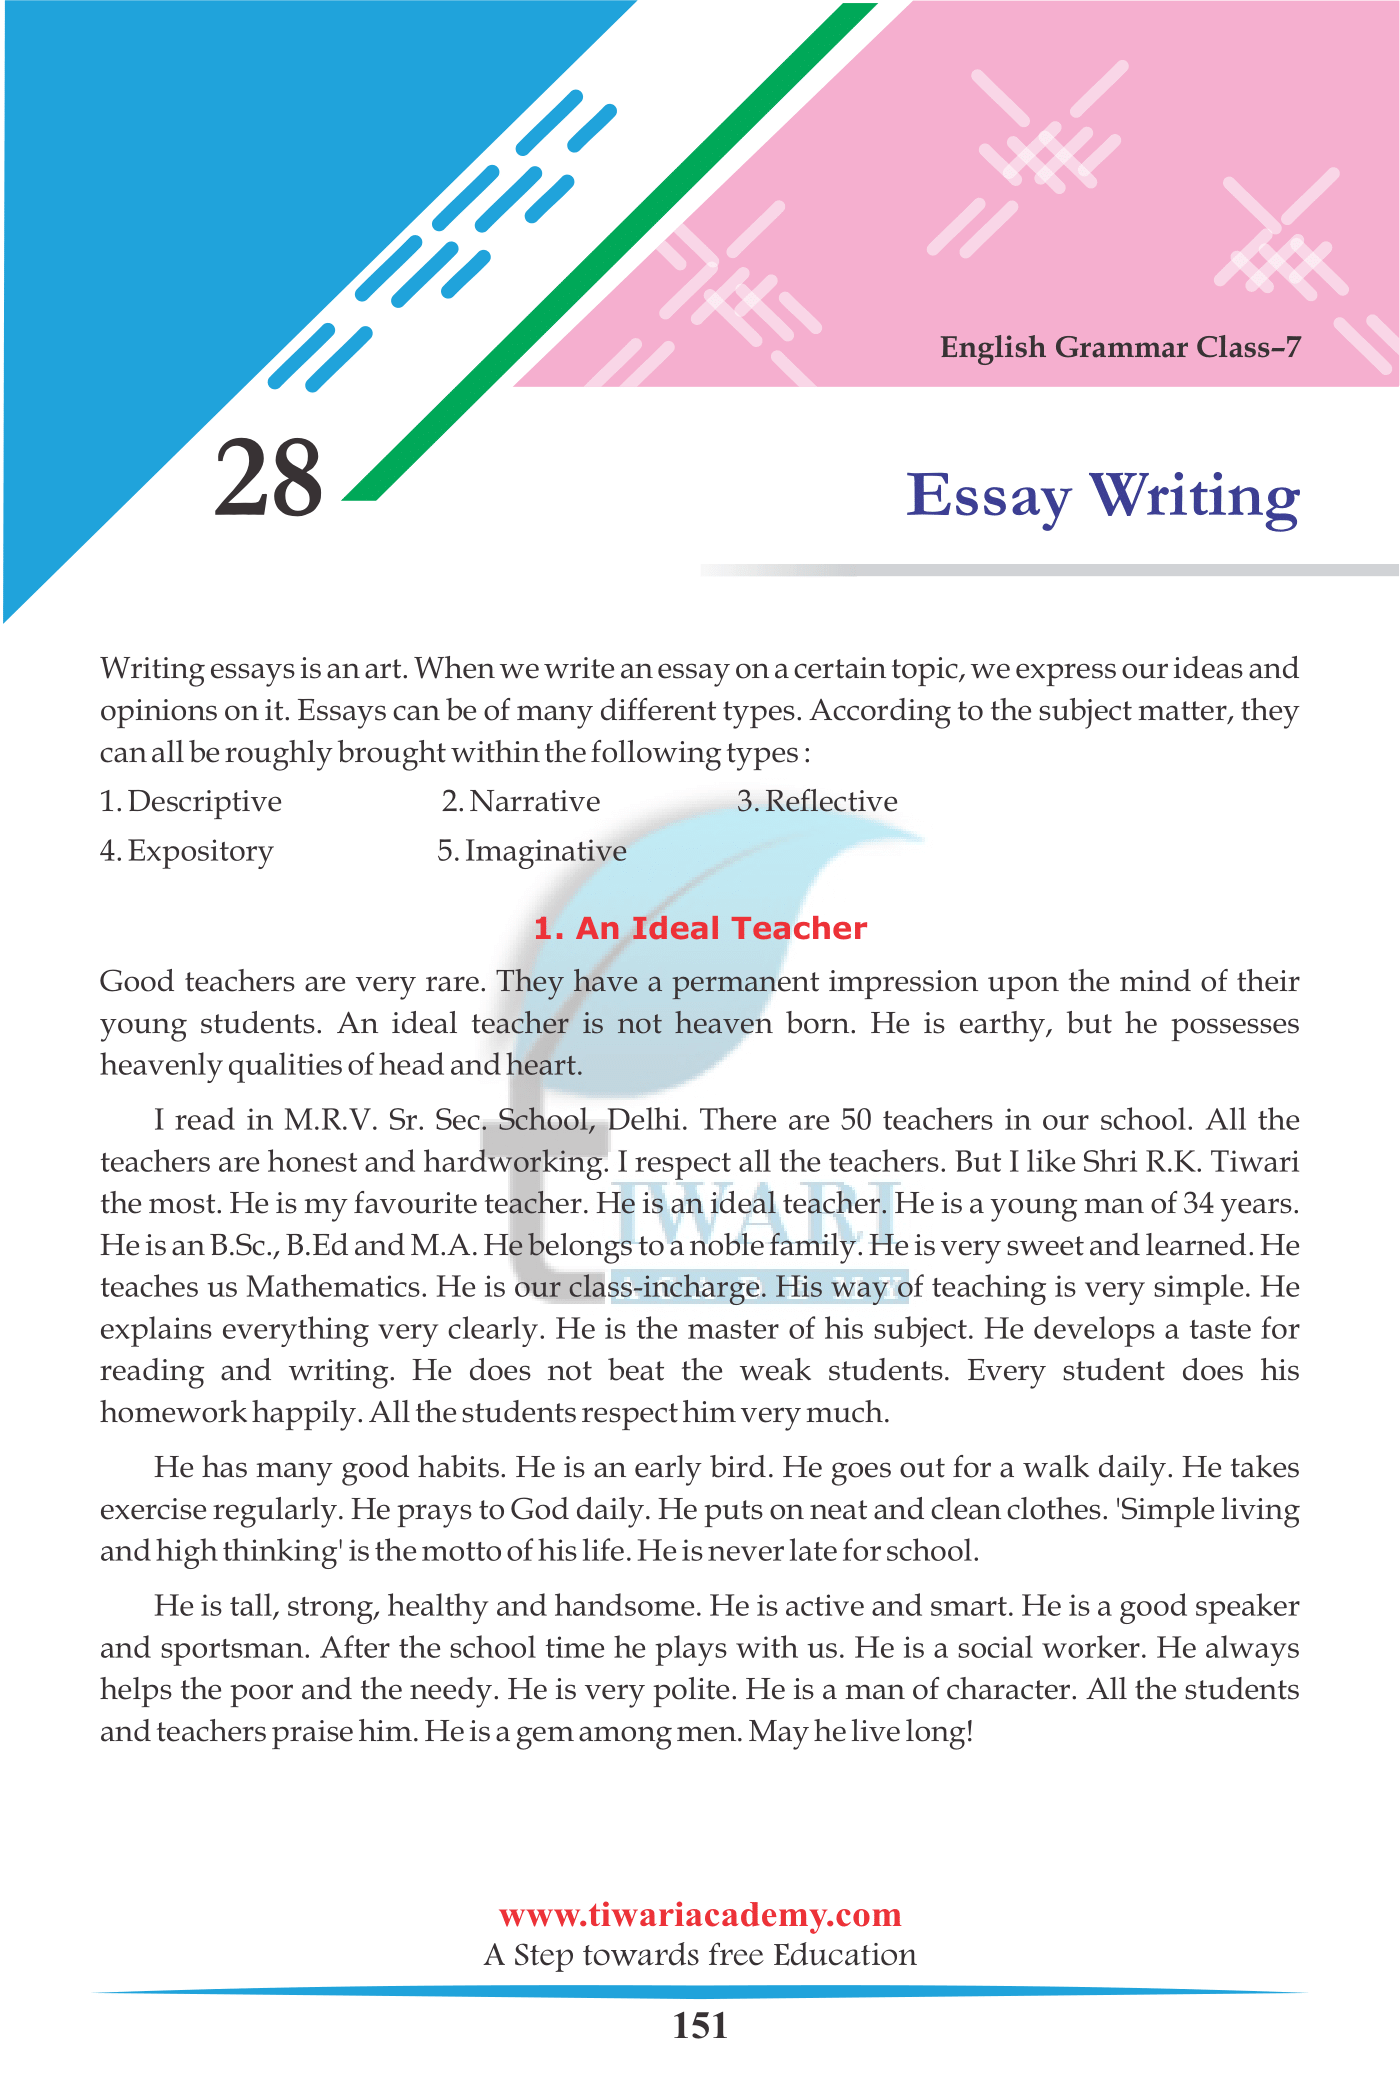 academic essay writing service - So Simple Even Your Kids Can Do It